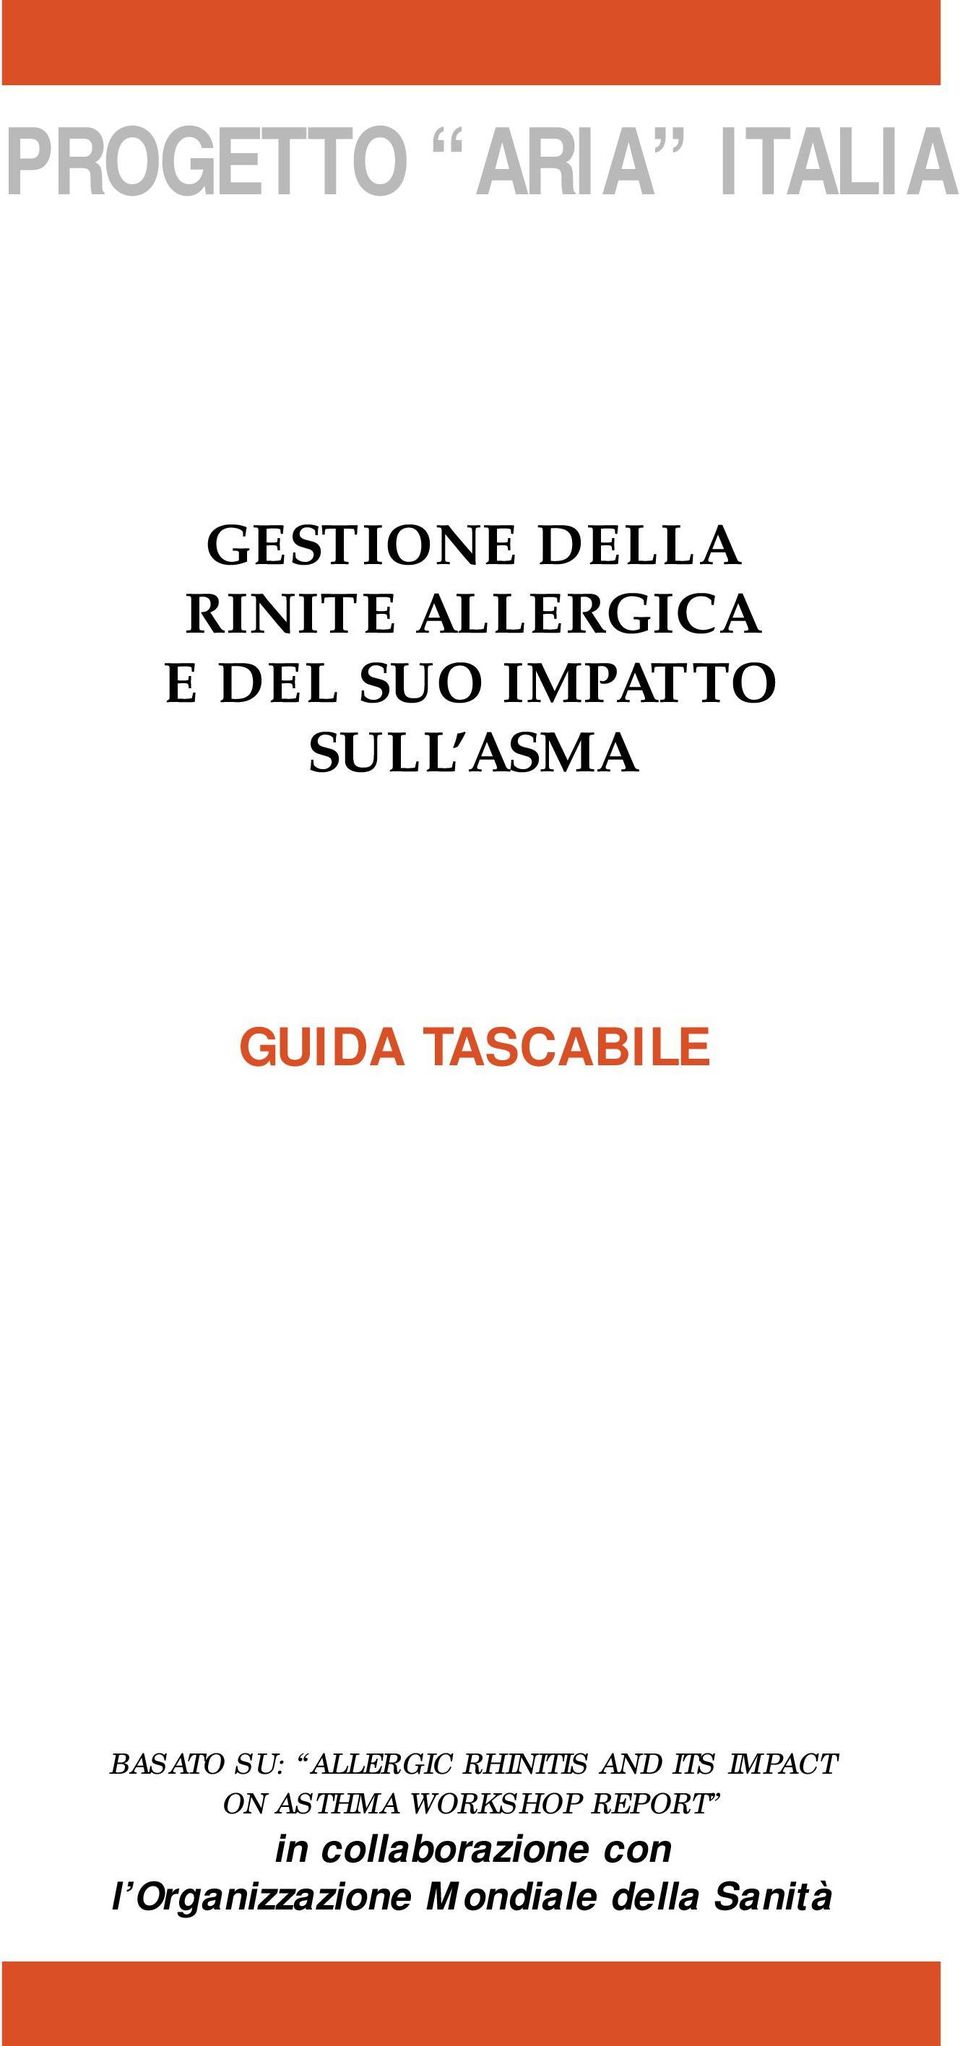 ALLERGIC RHINITIS AND ITS IMPACT ON ASTHMA WORKSHOP